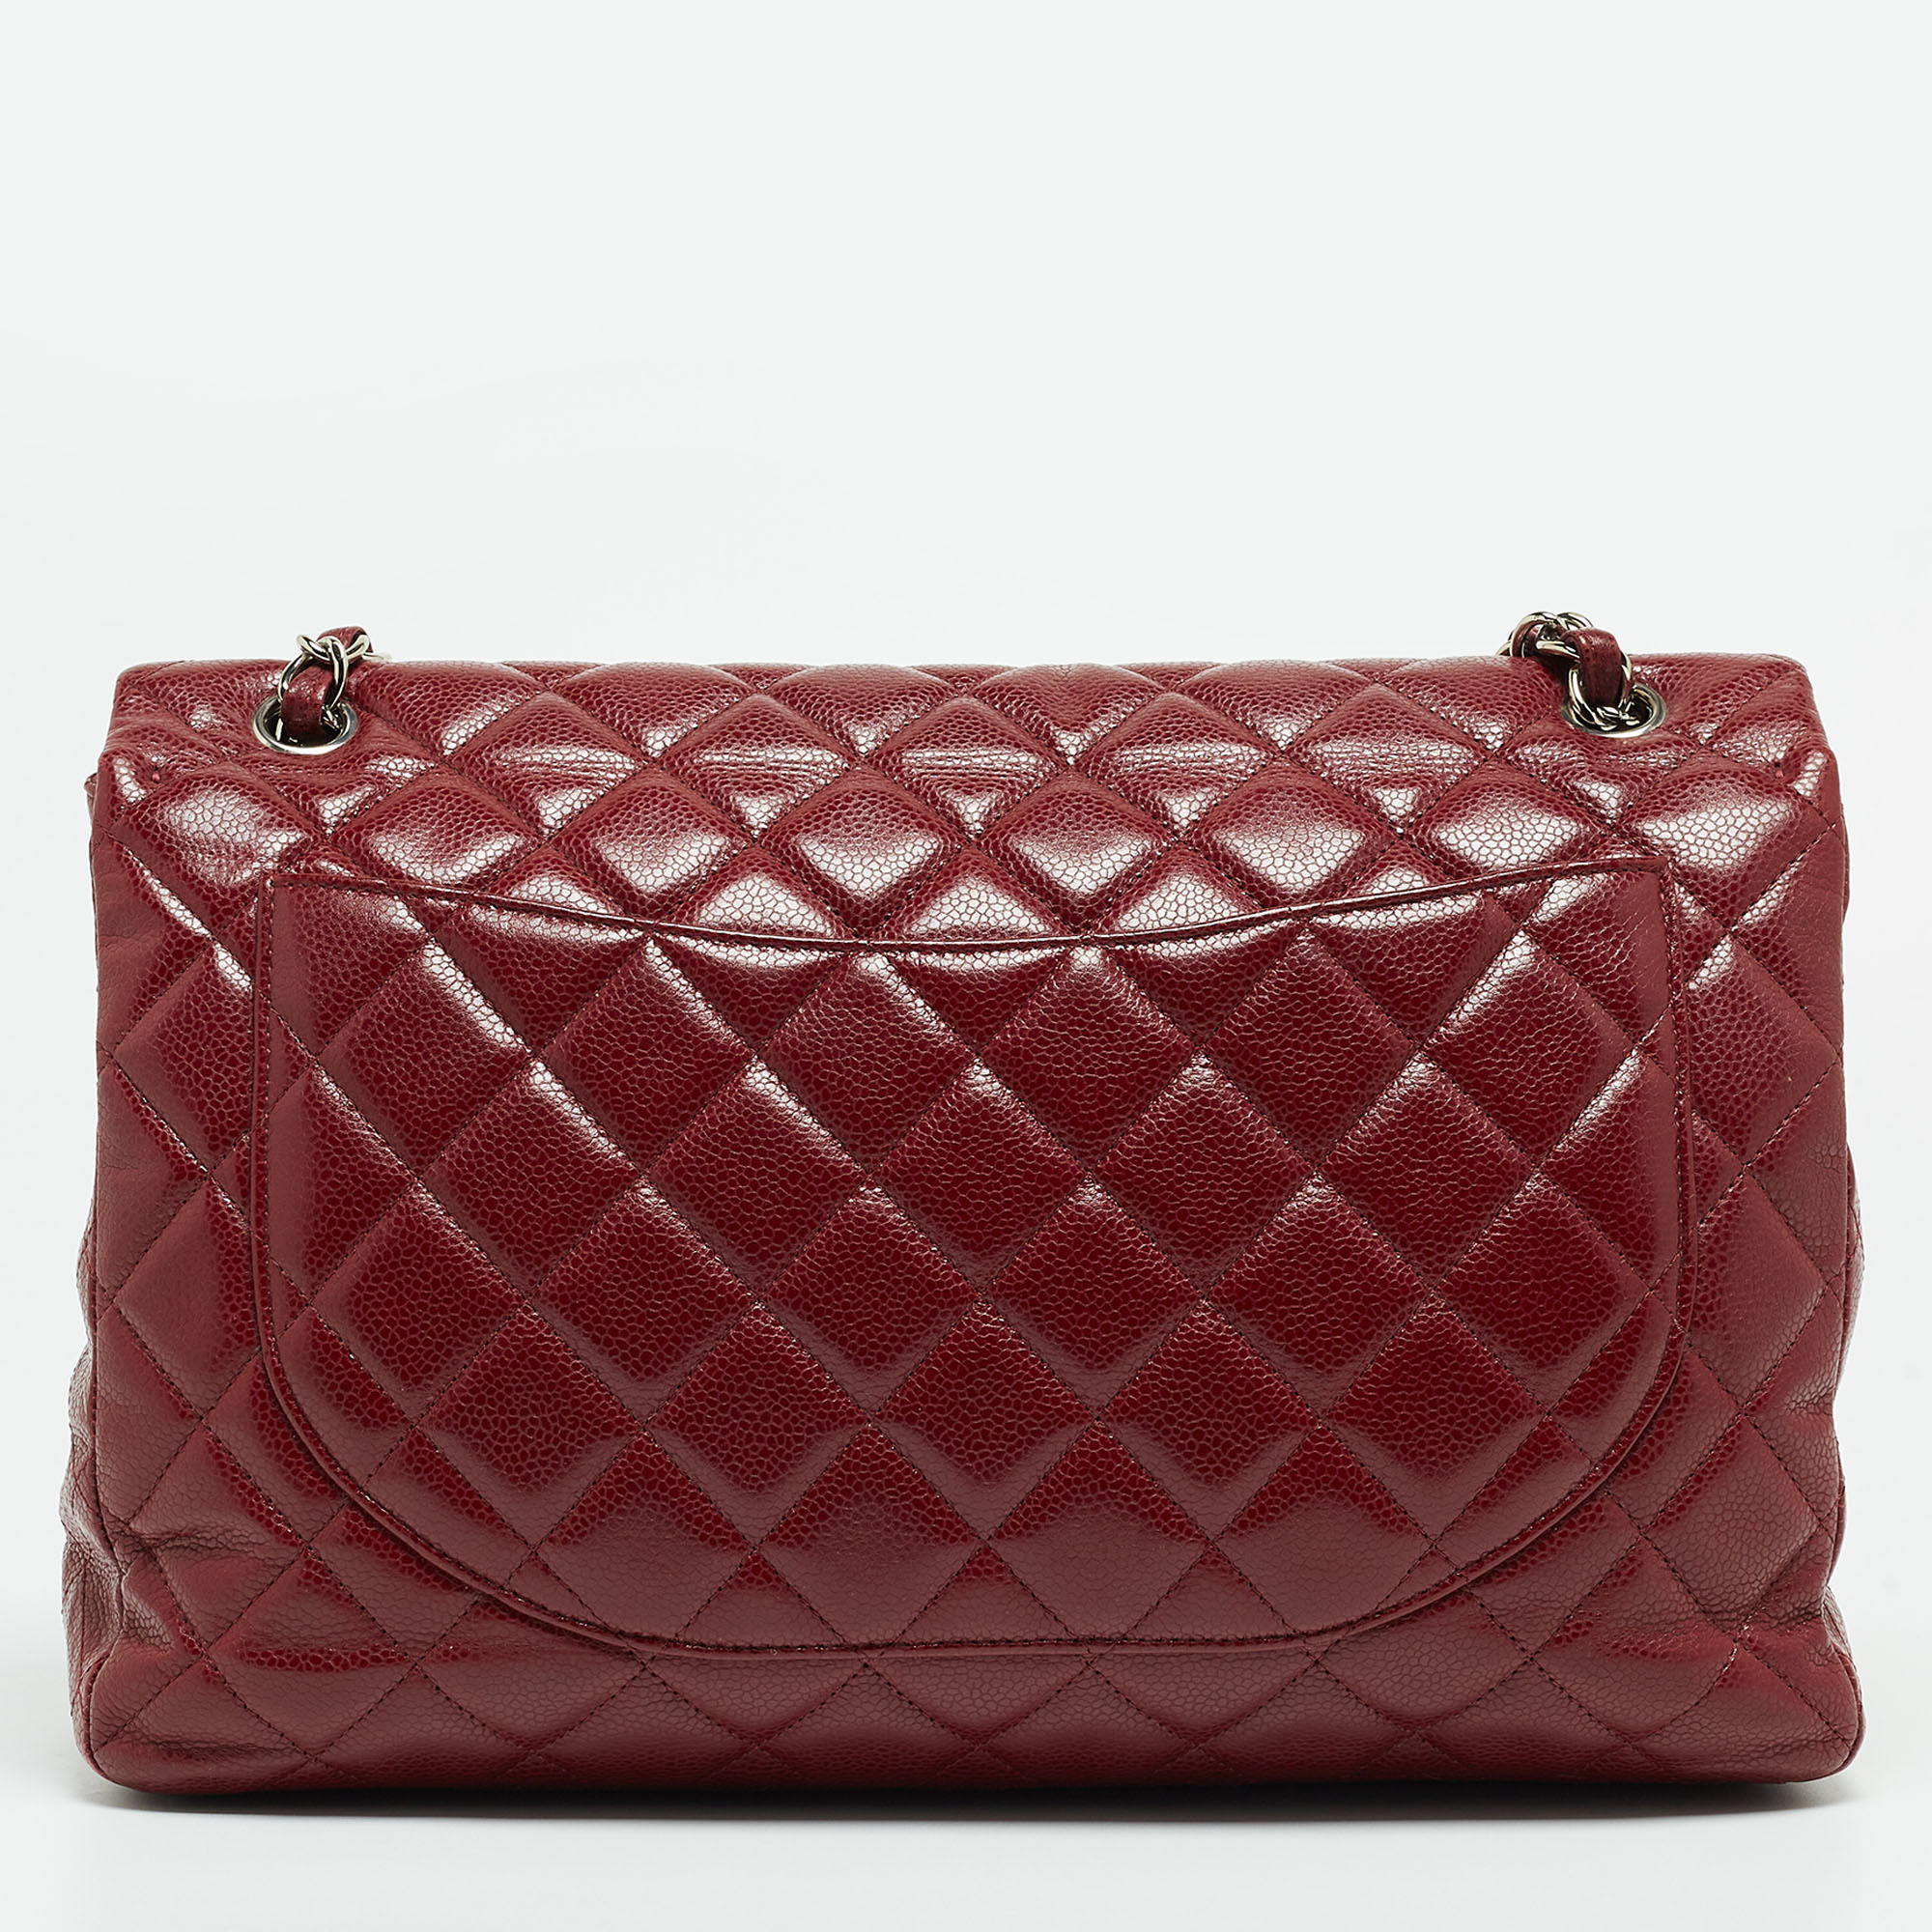 Chanel Burgundy Quilted Caviar Leather Maxi Classic Single Flap Bag